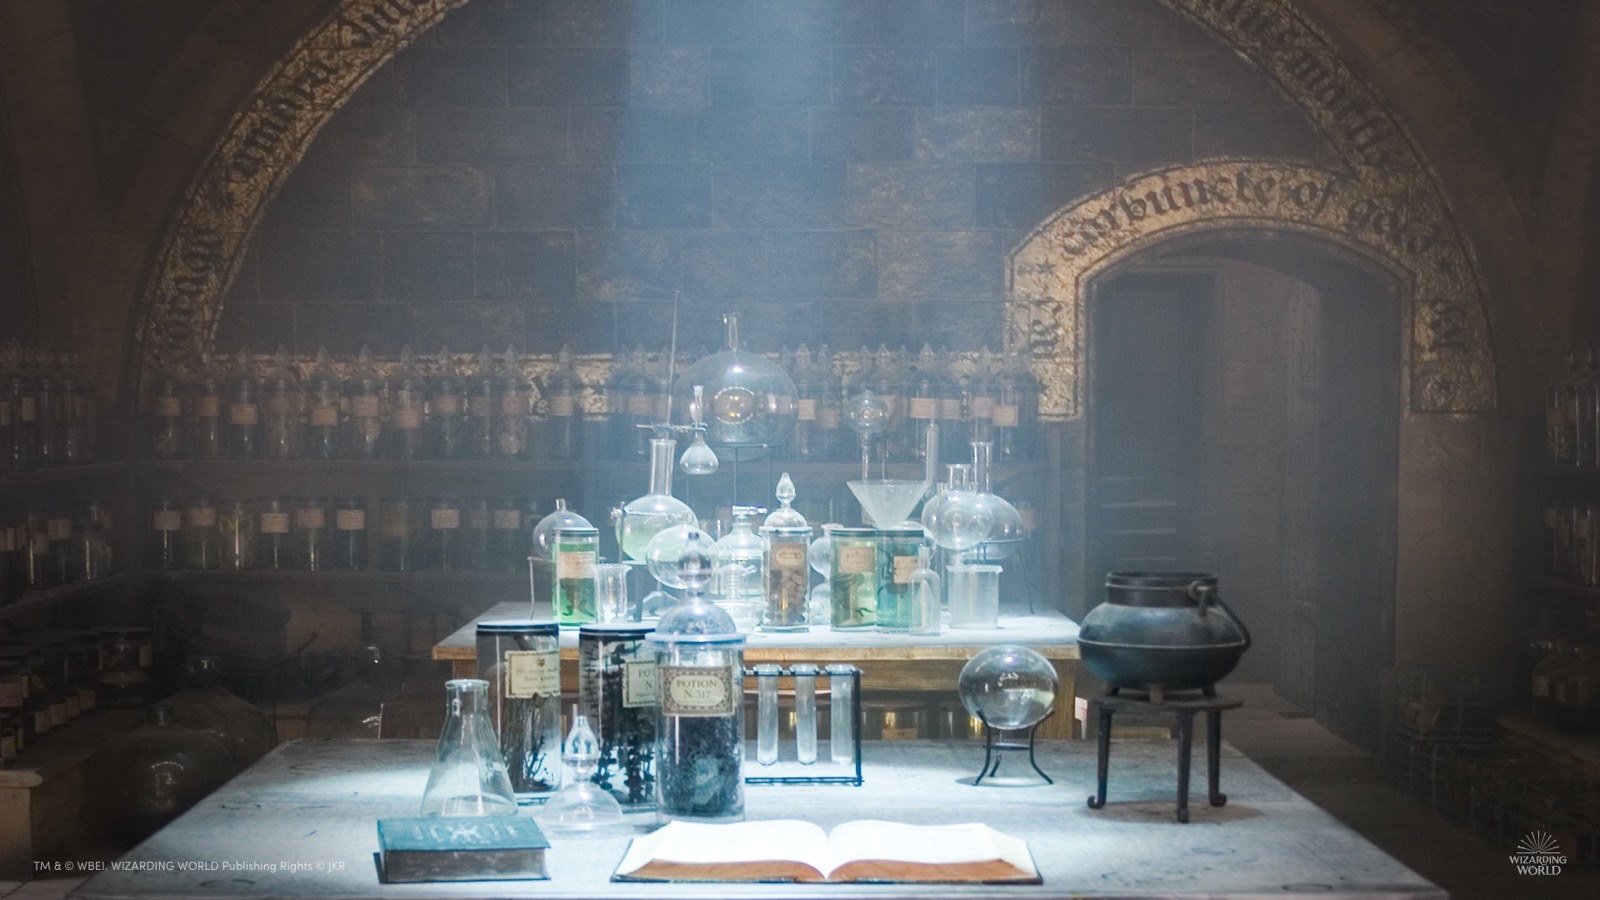 This 🌔 Fantasy Quiz Is Scientifically Designed to Determine What Supernatural Being You’re Most Like Hogwarts Potions lab